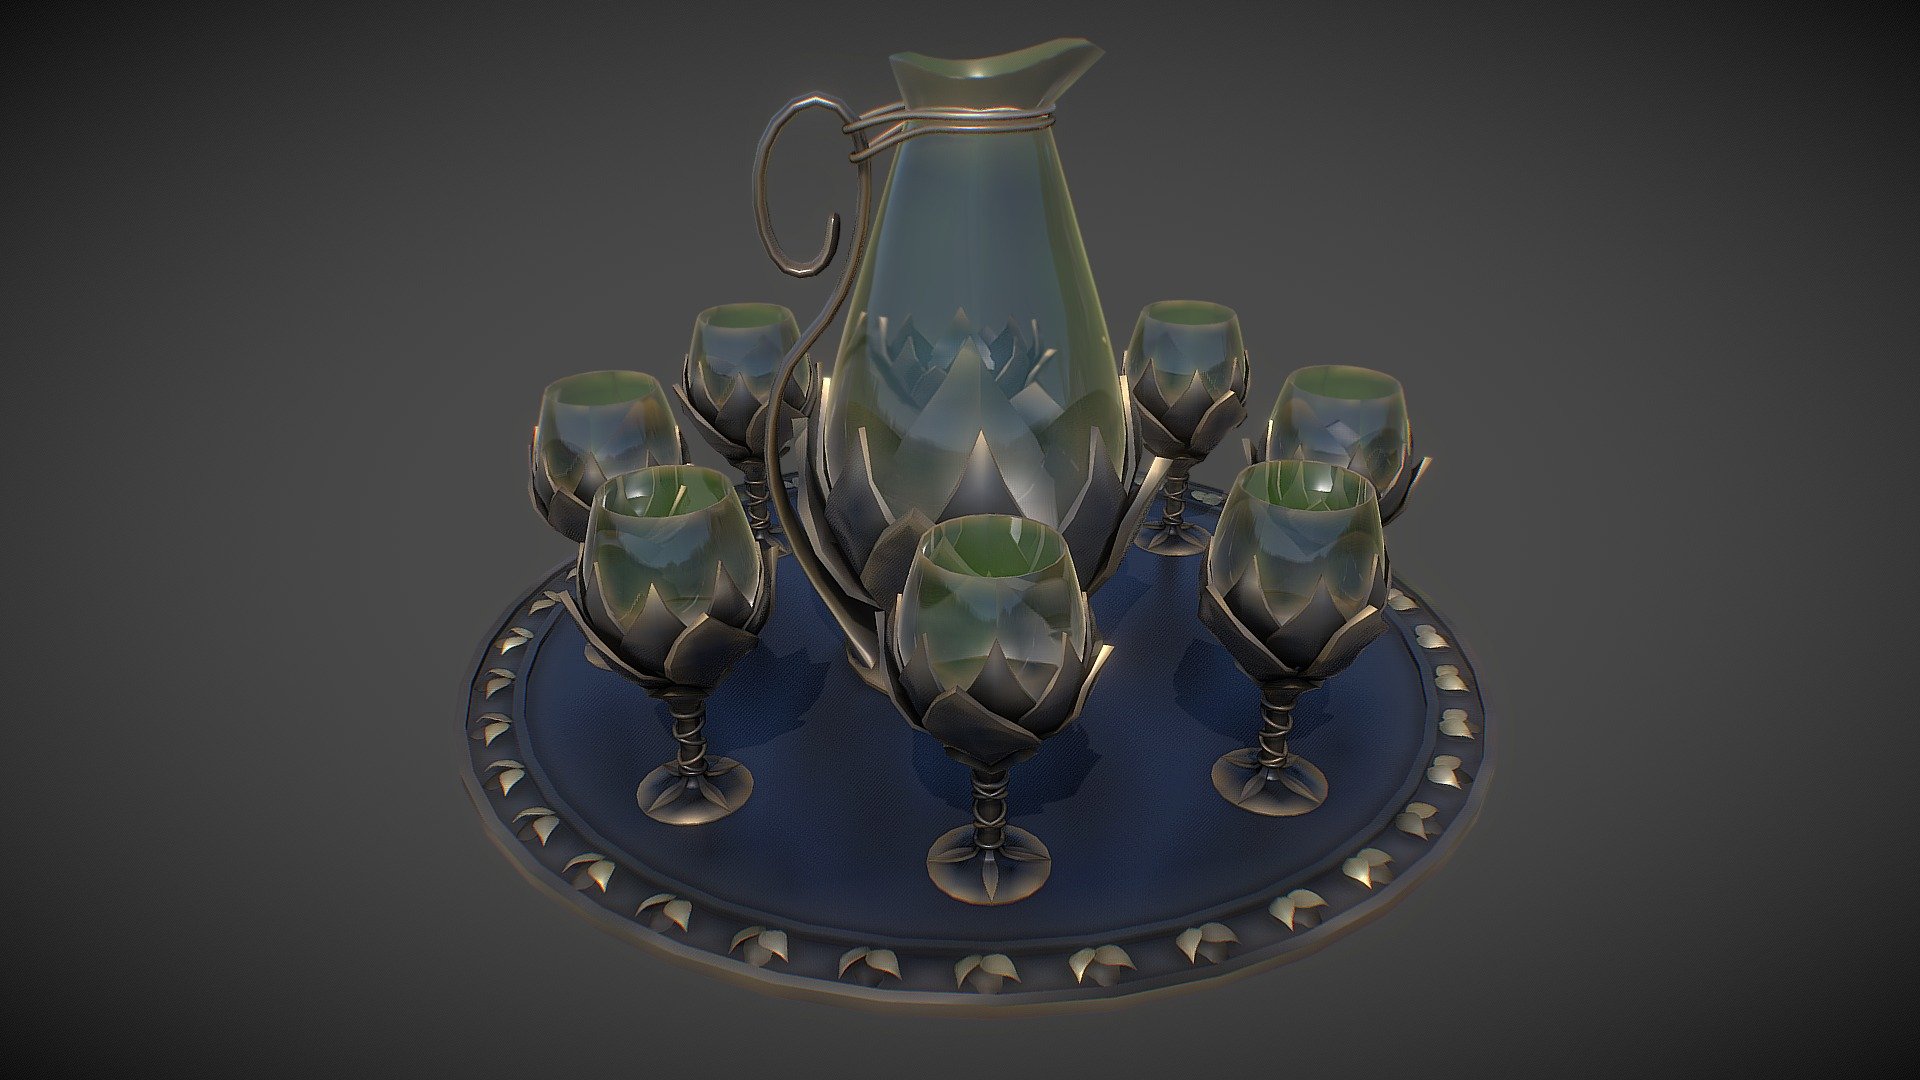 Hello. This is a high definition quality polygon of a Table Service 3D Model with PBR textures. Extremely detailed and realistic. Suitable for movie prop, architectural visualizations, advertising renders and other. The archive includes Obj and FBX, Marmoset scene, textures for the Unity: Base color, Height, Metallic, Mixed AO, Normal_OpenGL, Roughness. And also included in the archive textures for UE: BaseColor, Normal, OcclusionRoughnessMetallic. All textures are 4k resolution. The number of materials corresponds to the number of main objects in the scene. The model contains 19 object: If you need, we will make a file of this model for 3D printing especially for you 3d model